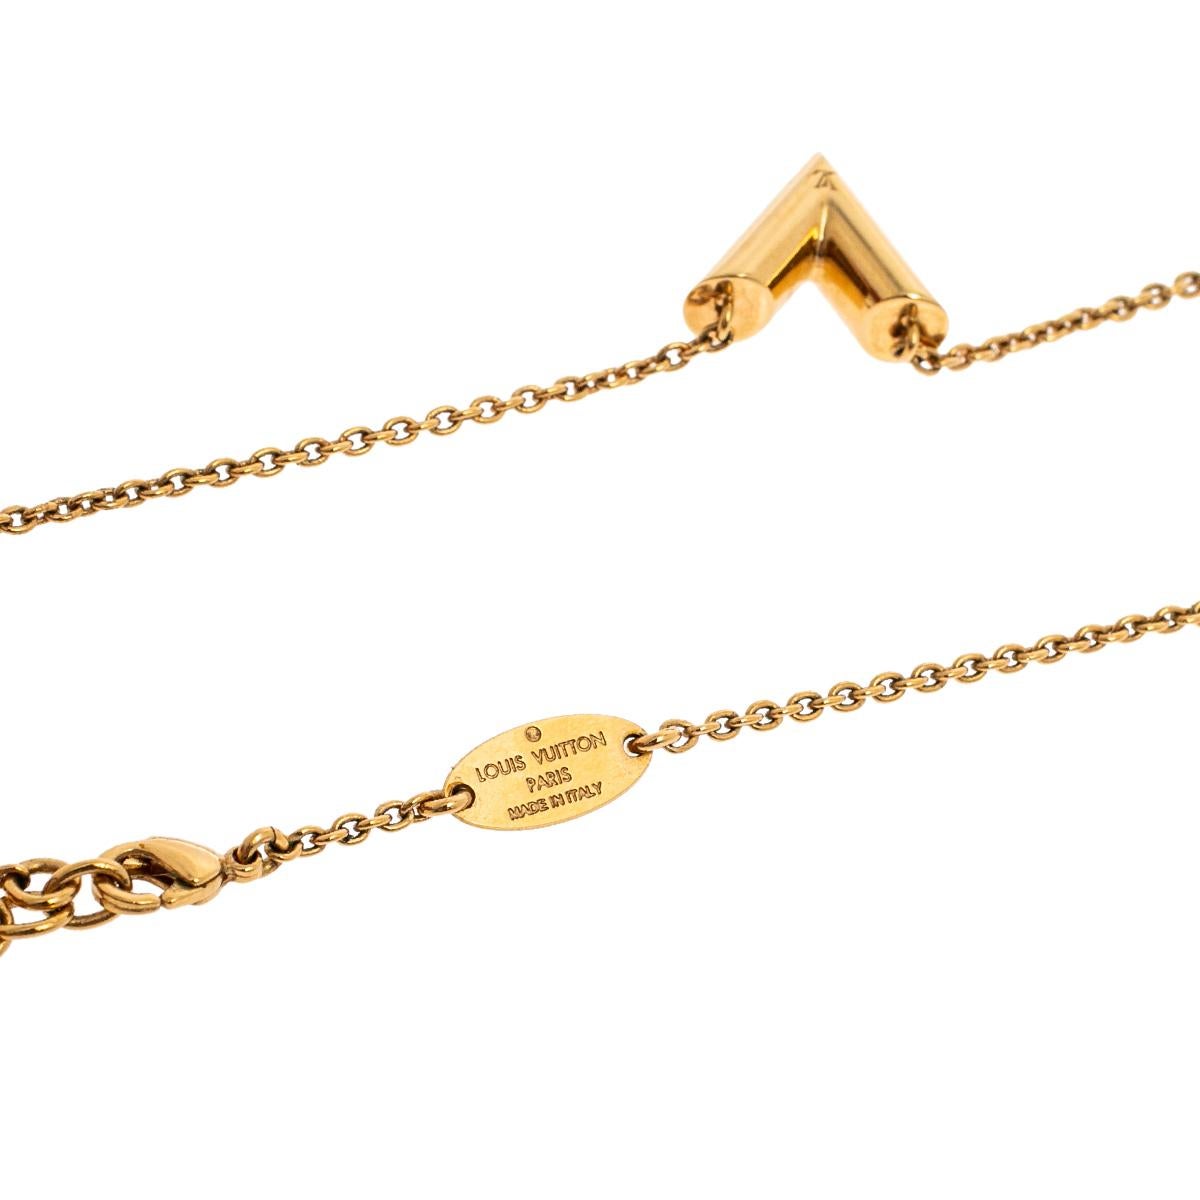 Add a timeless touch to both casual and even special looks with this beautiful Louis Vuitton Essential V necklace. Constructed in gold-tone metal, this necklace features a smooth V pendant. An adjustable lobster hook completes the piece.

Includes: